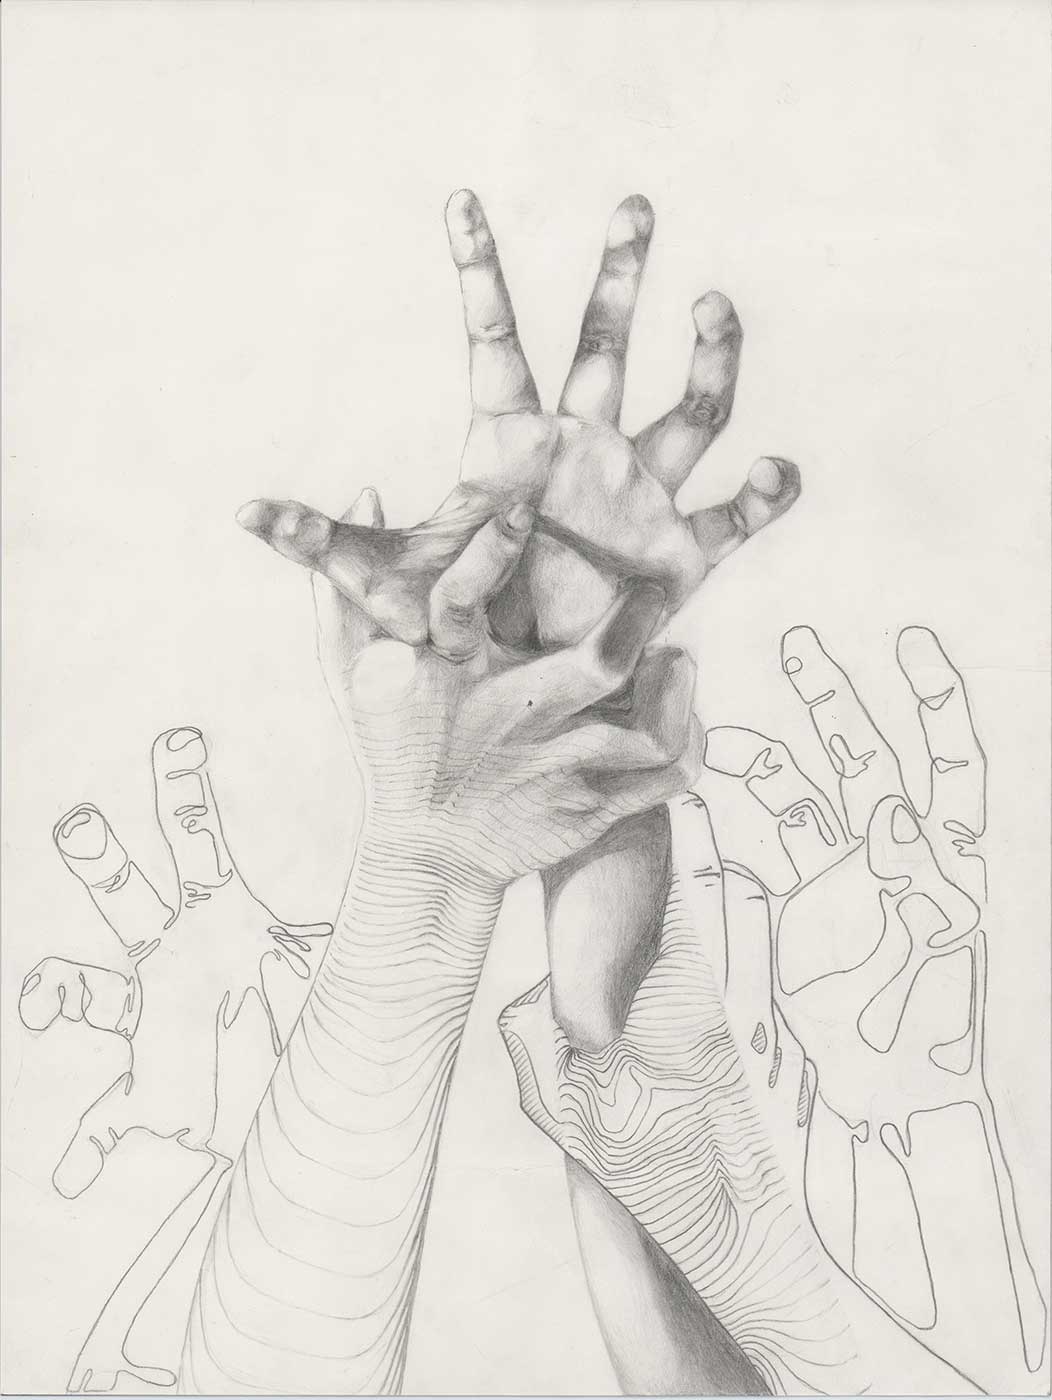 pencil drawing of a hand reaching up and others holding it down.